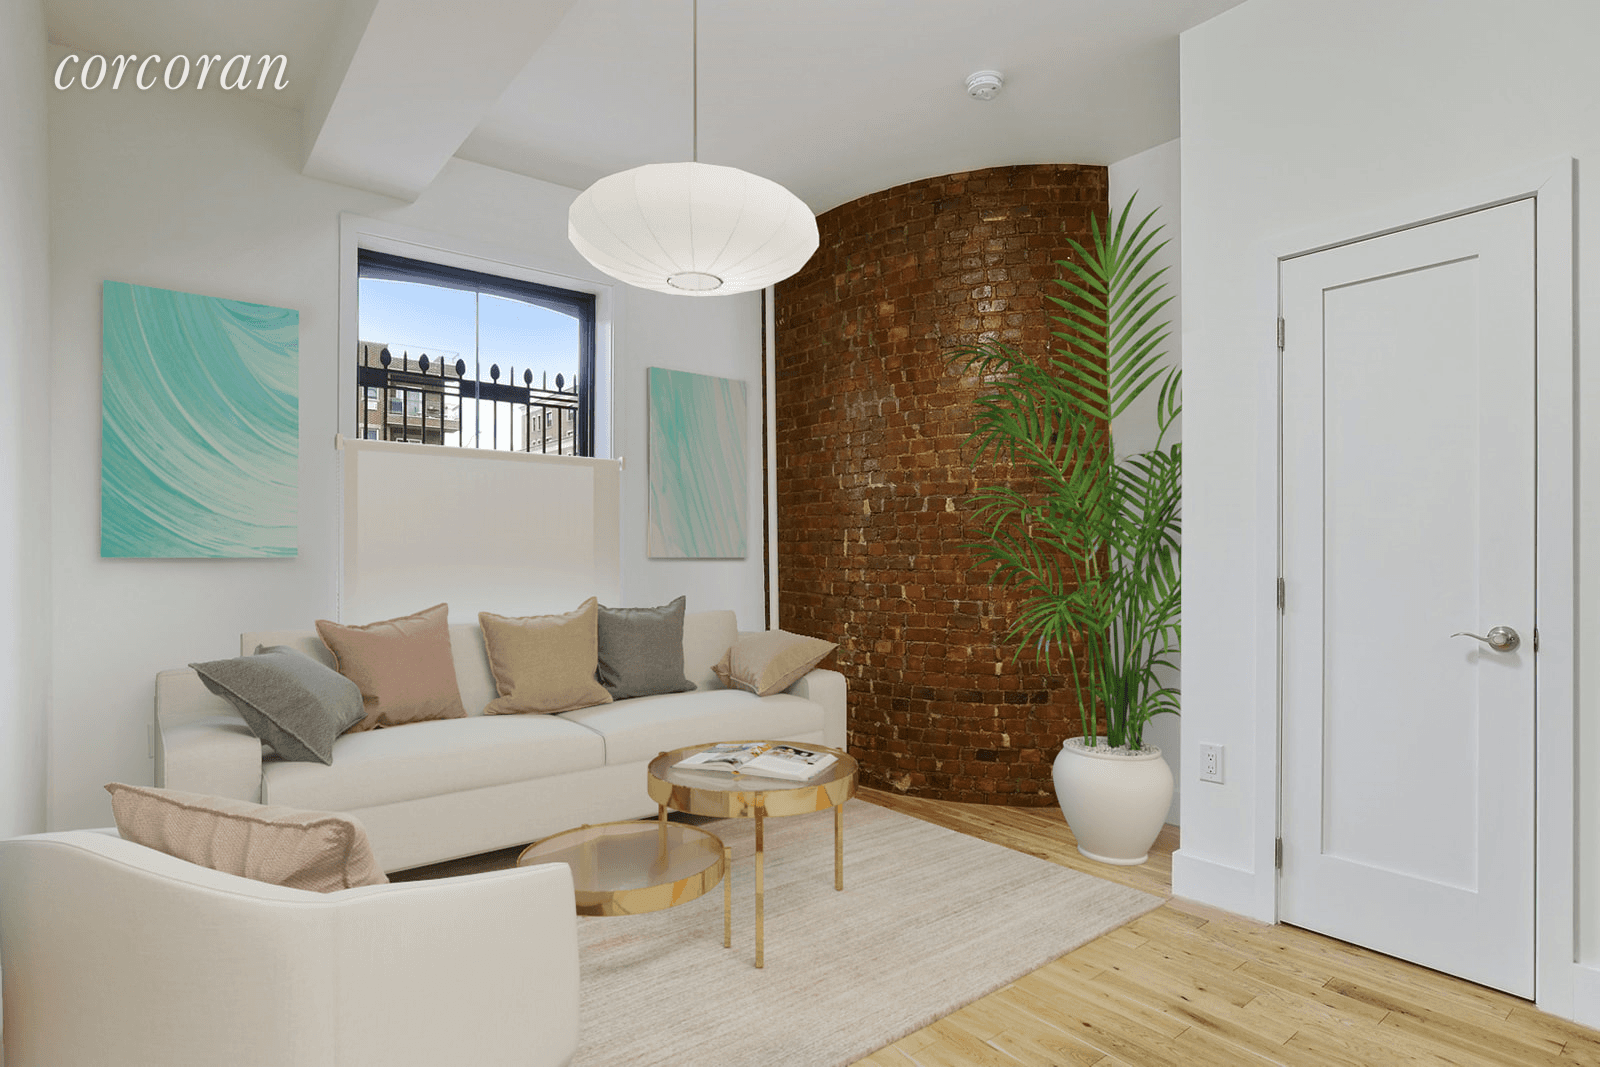 High ceilings, large sash windows, exposed brick and beautifully finished hardwood floors frame this fully renovated, loft like one bedroom condo in Cobble Hill.